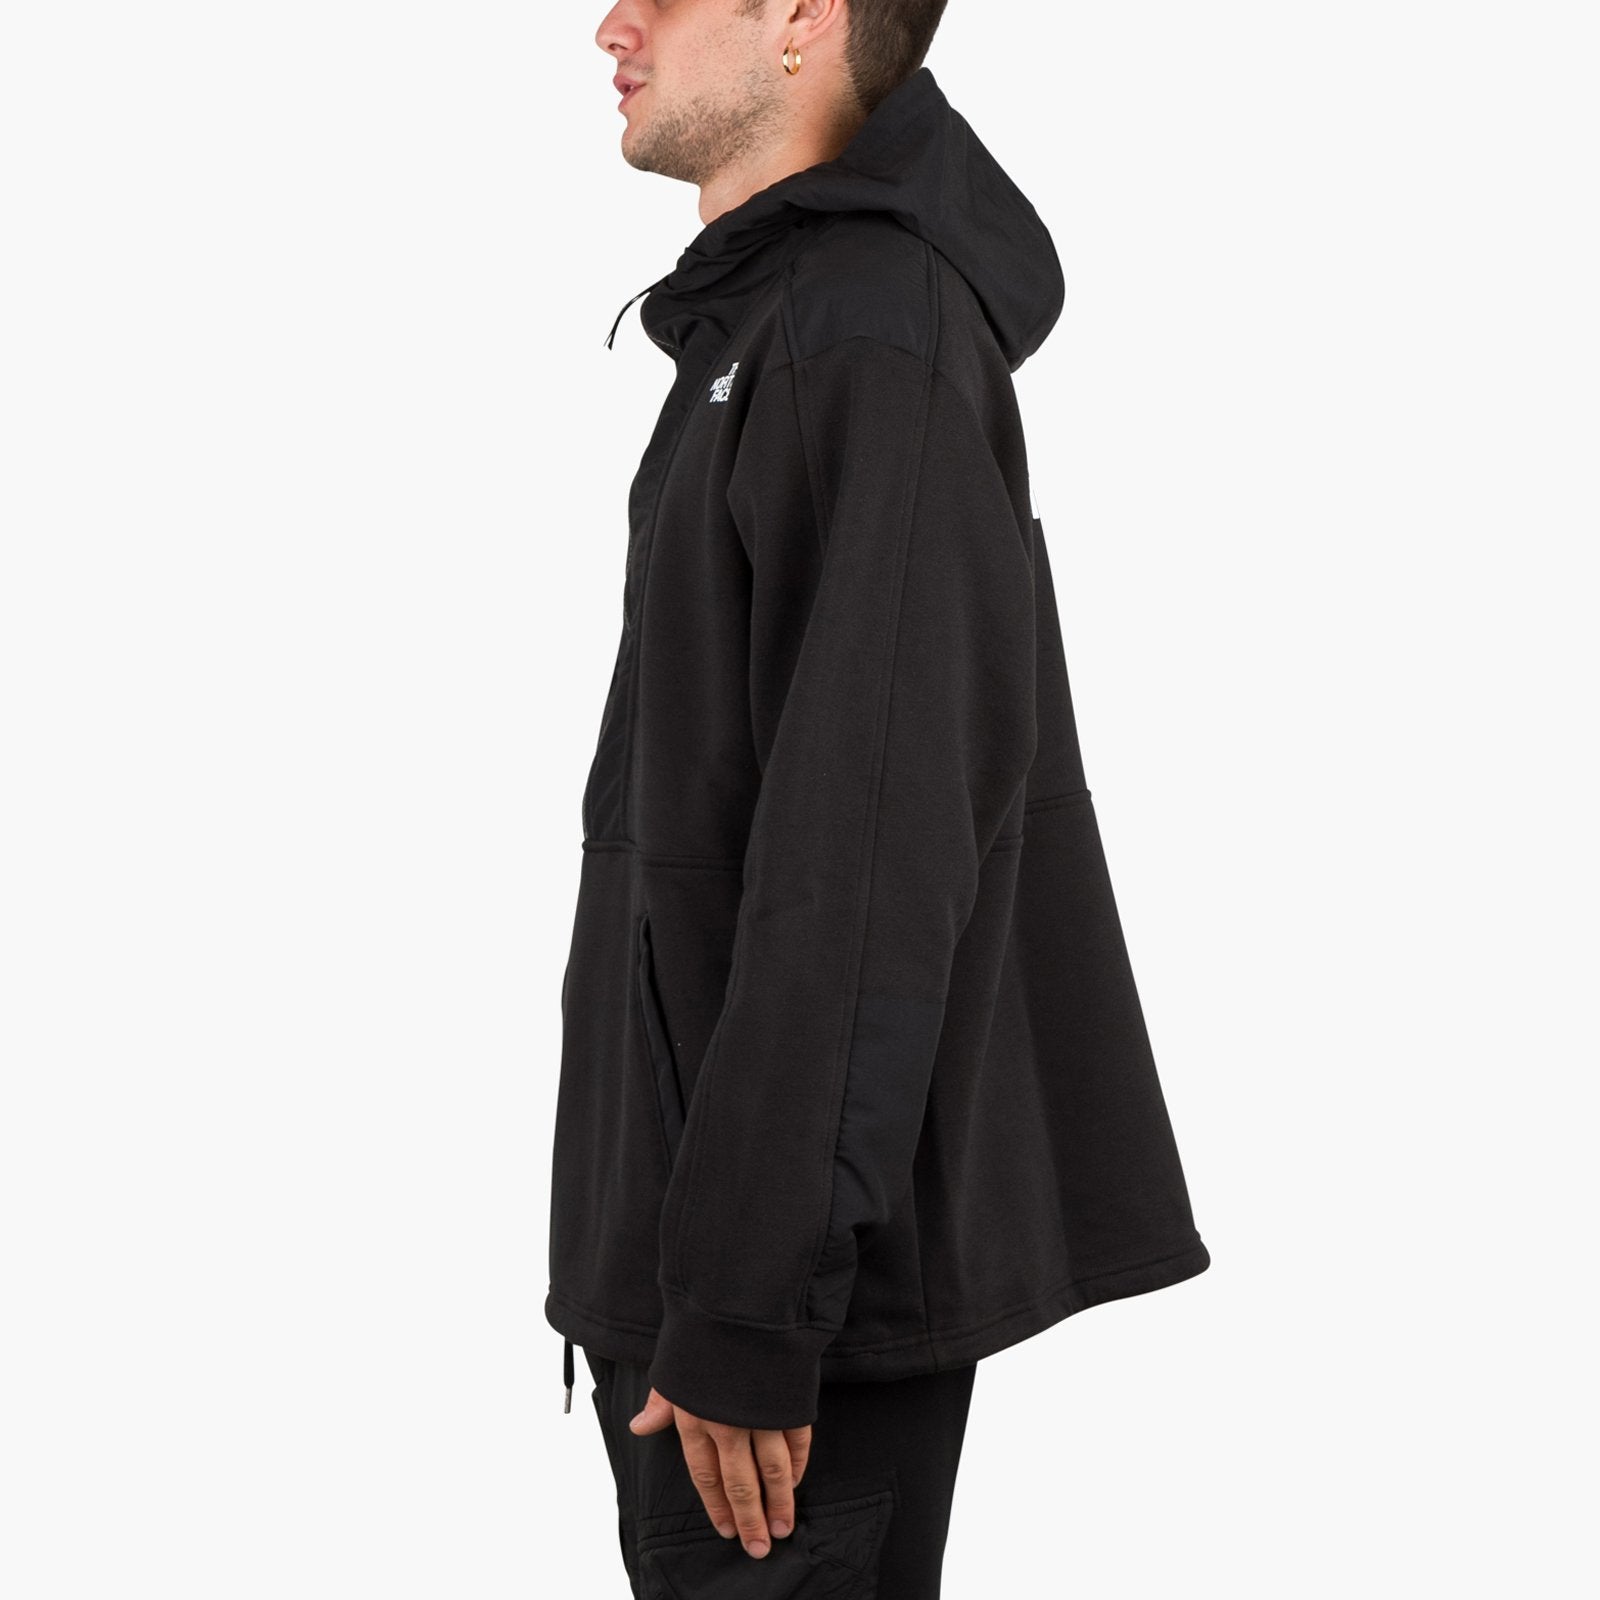 The North Face Graf Po Hoodie-T93XB2JK3-Black-Small-SUEDE Store